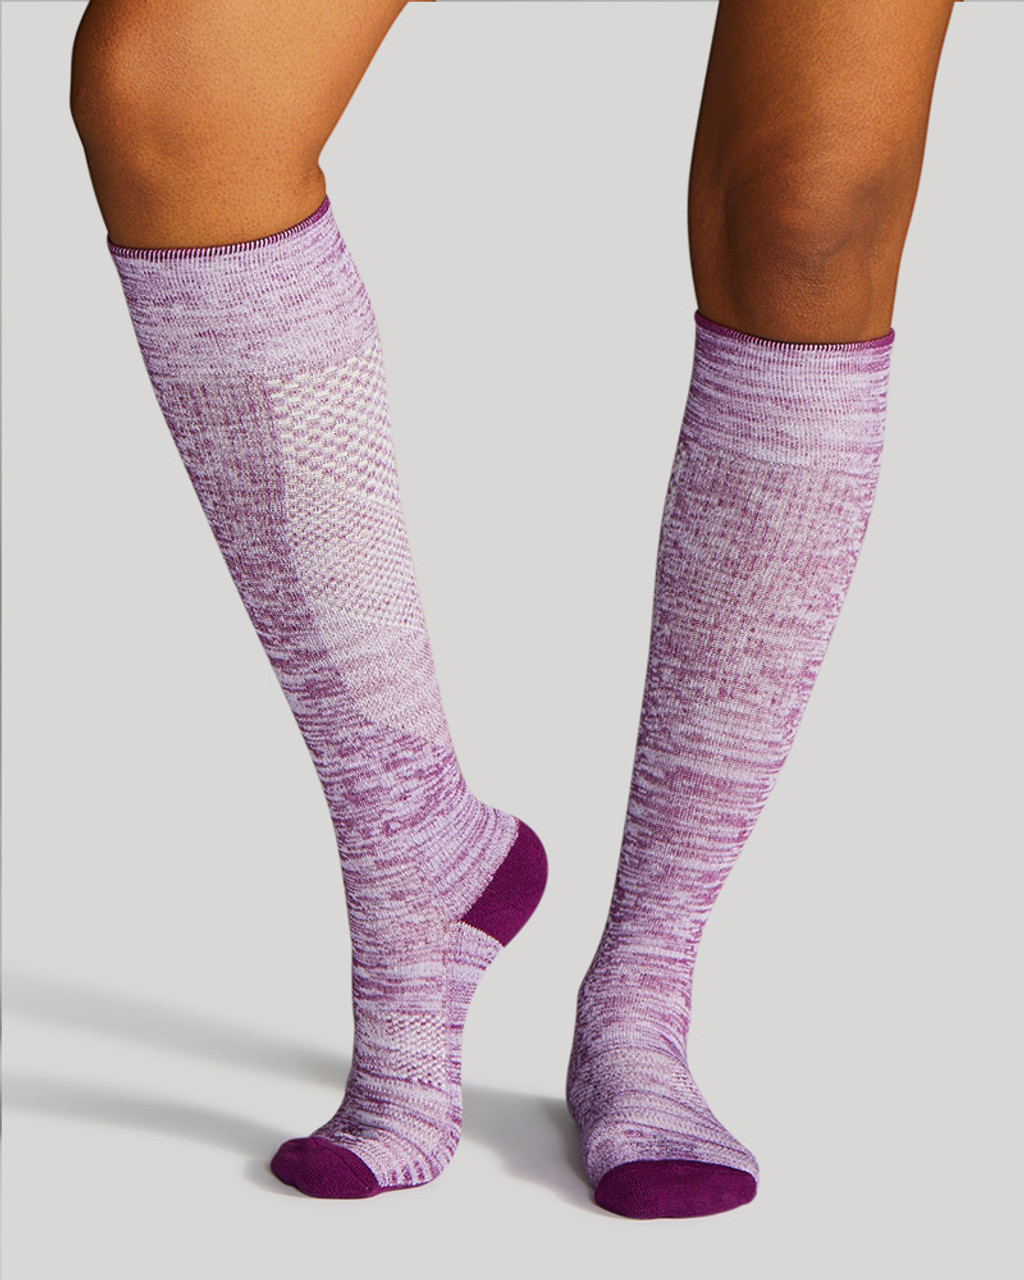 Easy-On Compression Socks | Women's Over the Calf